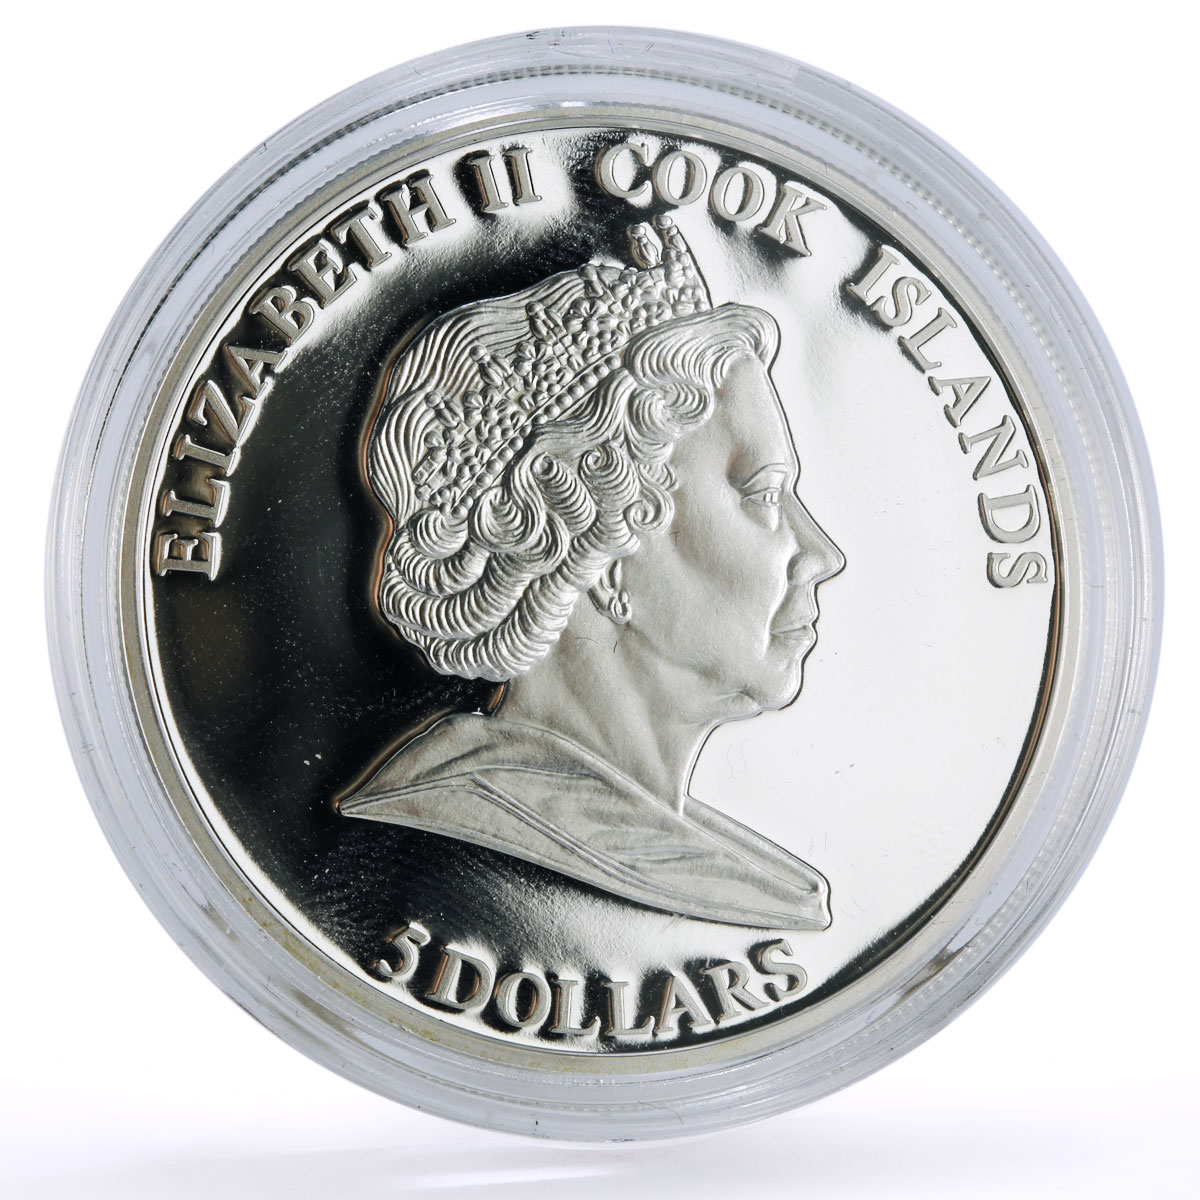 Niue 5 dollars Family Traditions series Dear Godmother colored silver coin 2010